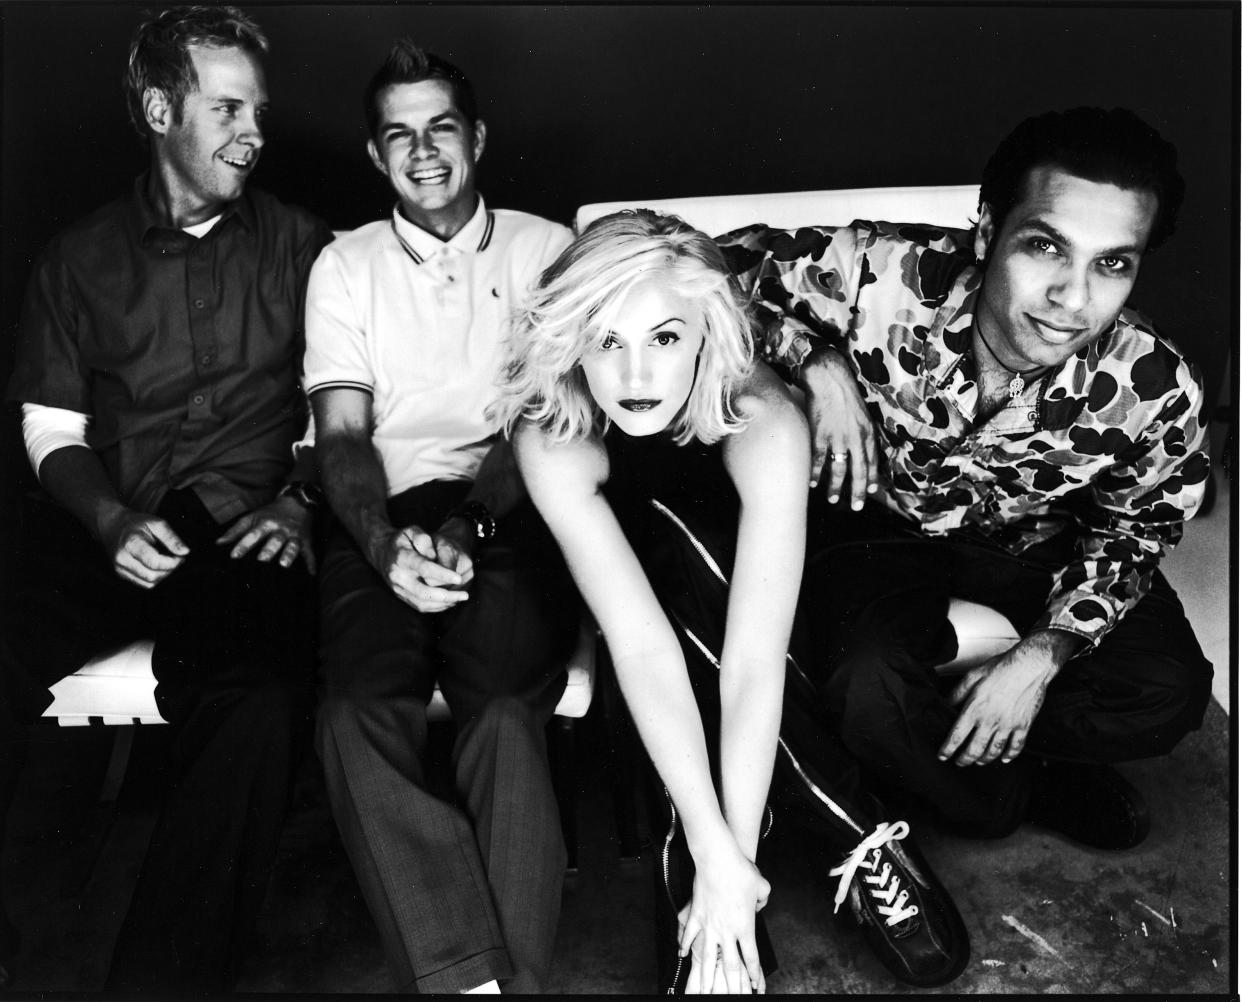 Stefani told Nylon magazine she thinks her band No Doubt was "disappointed" when she became pregnant with her second son Zuma.